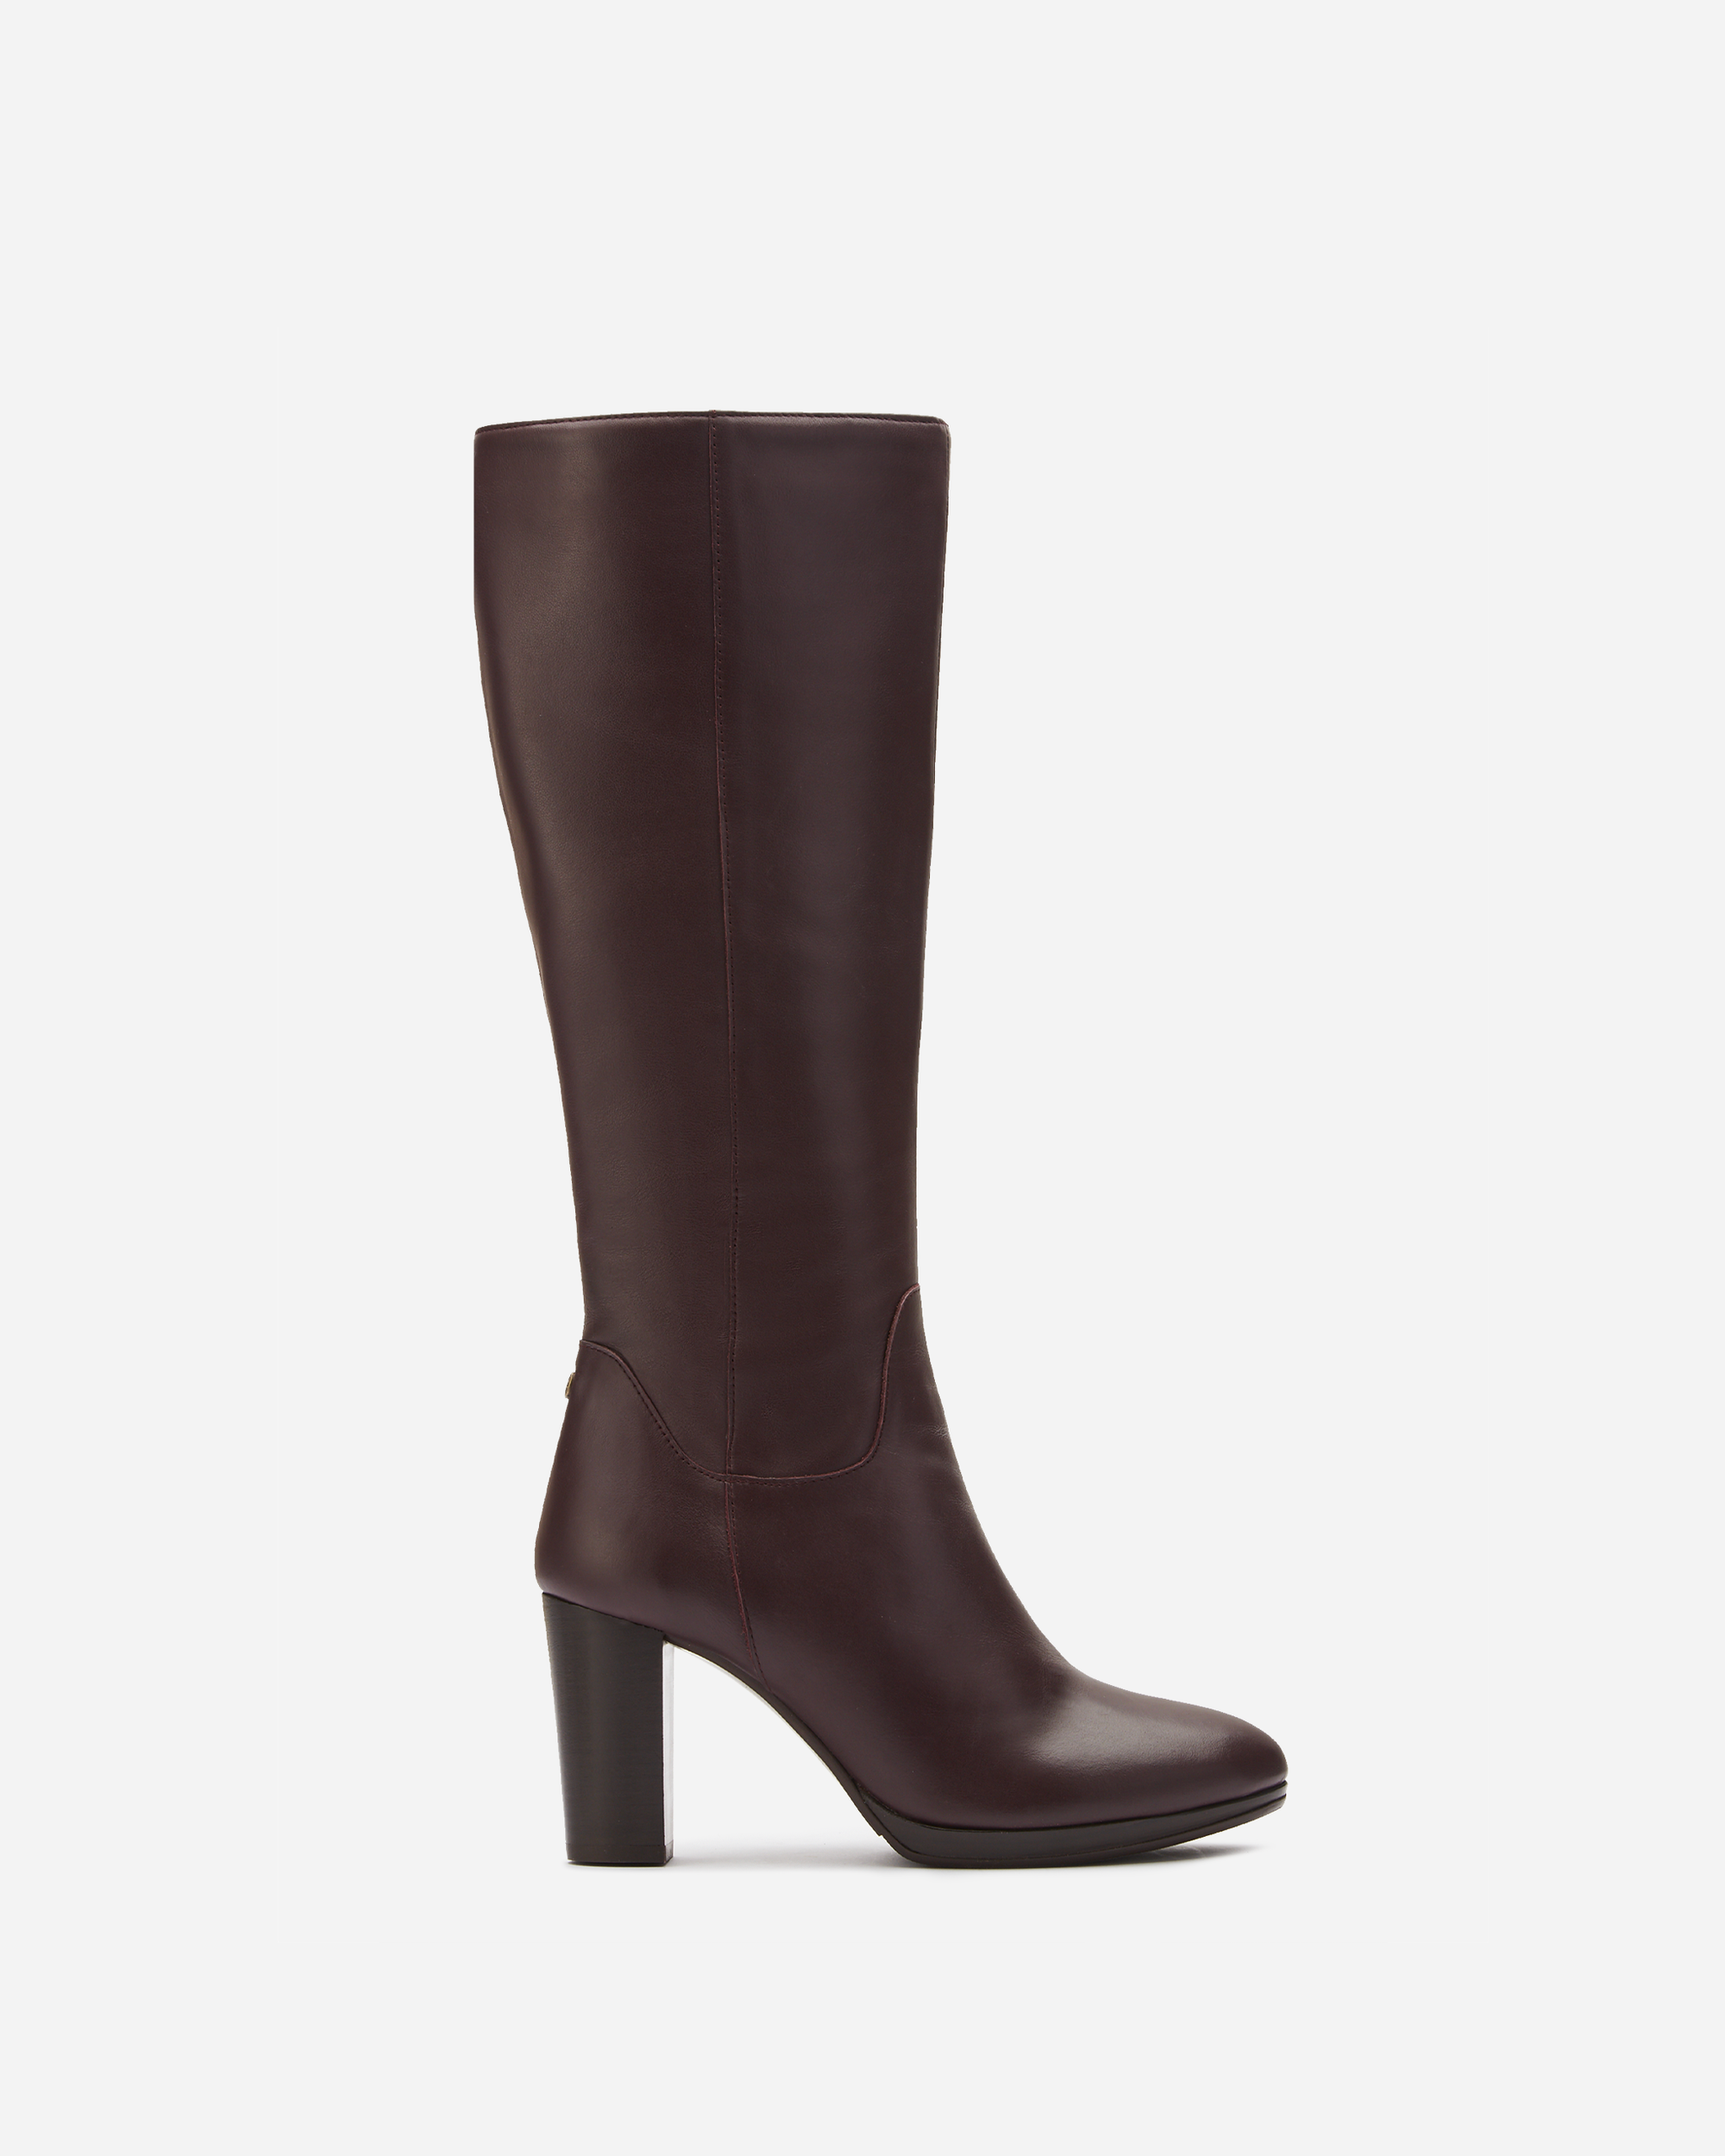 Belmore Knee High Boots in Burgundy Leather – DuoBoots